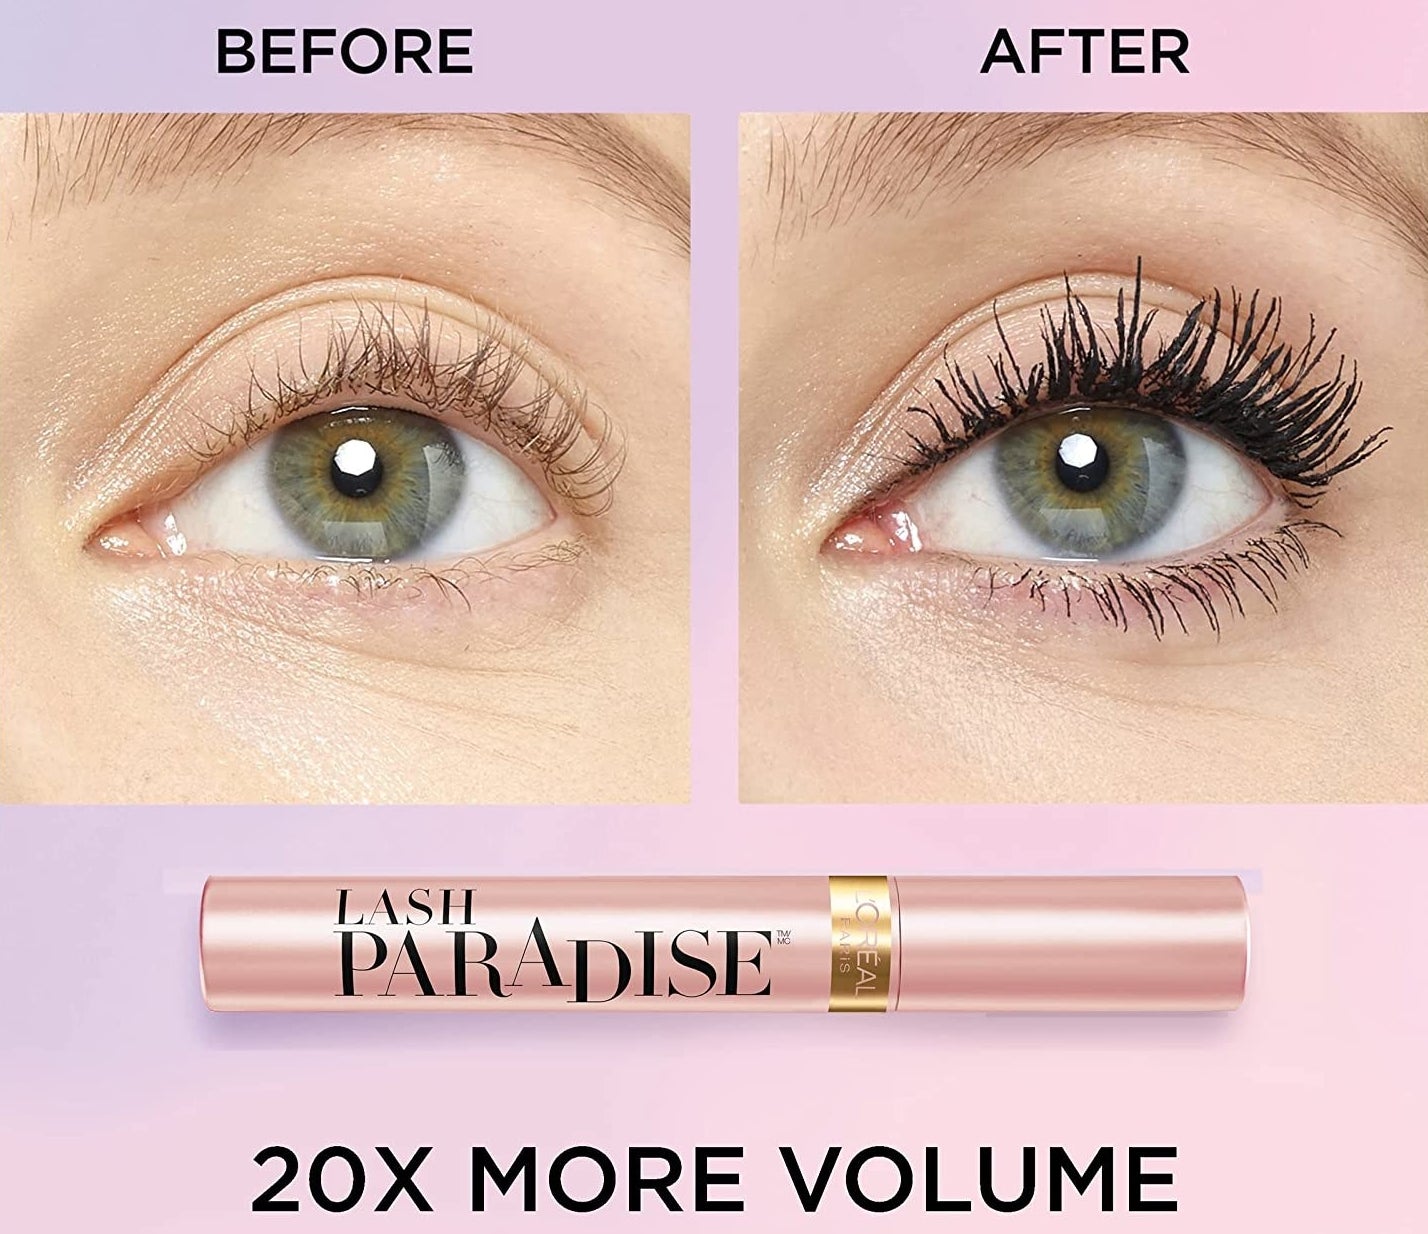 a before and after of lashes coated in mascara where the after shows them noticeably darker and longer